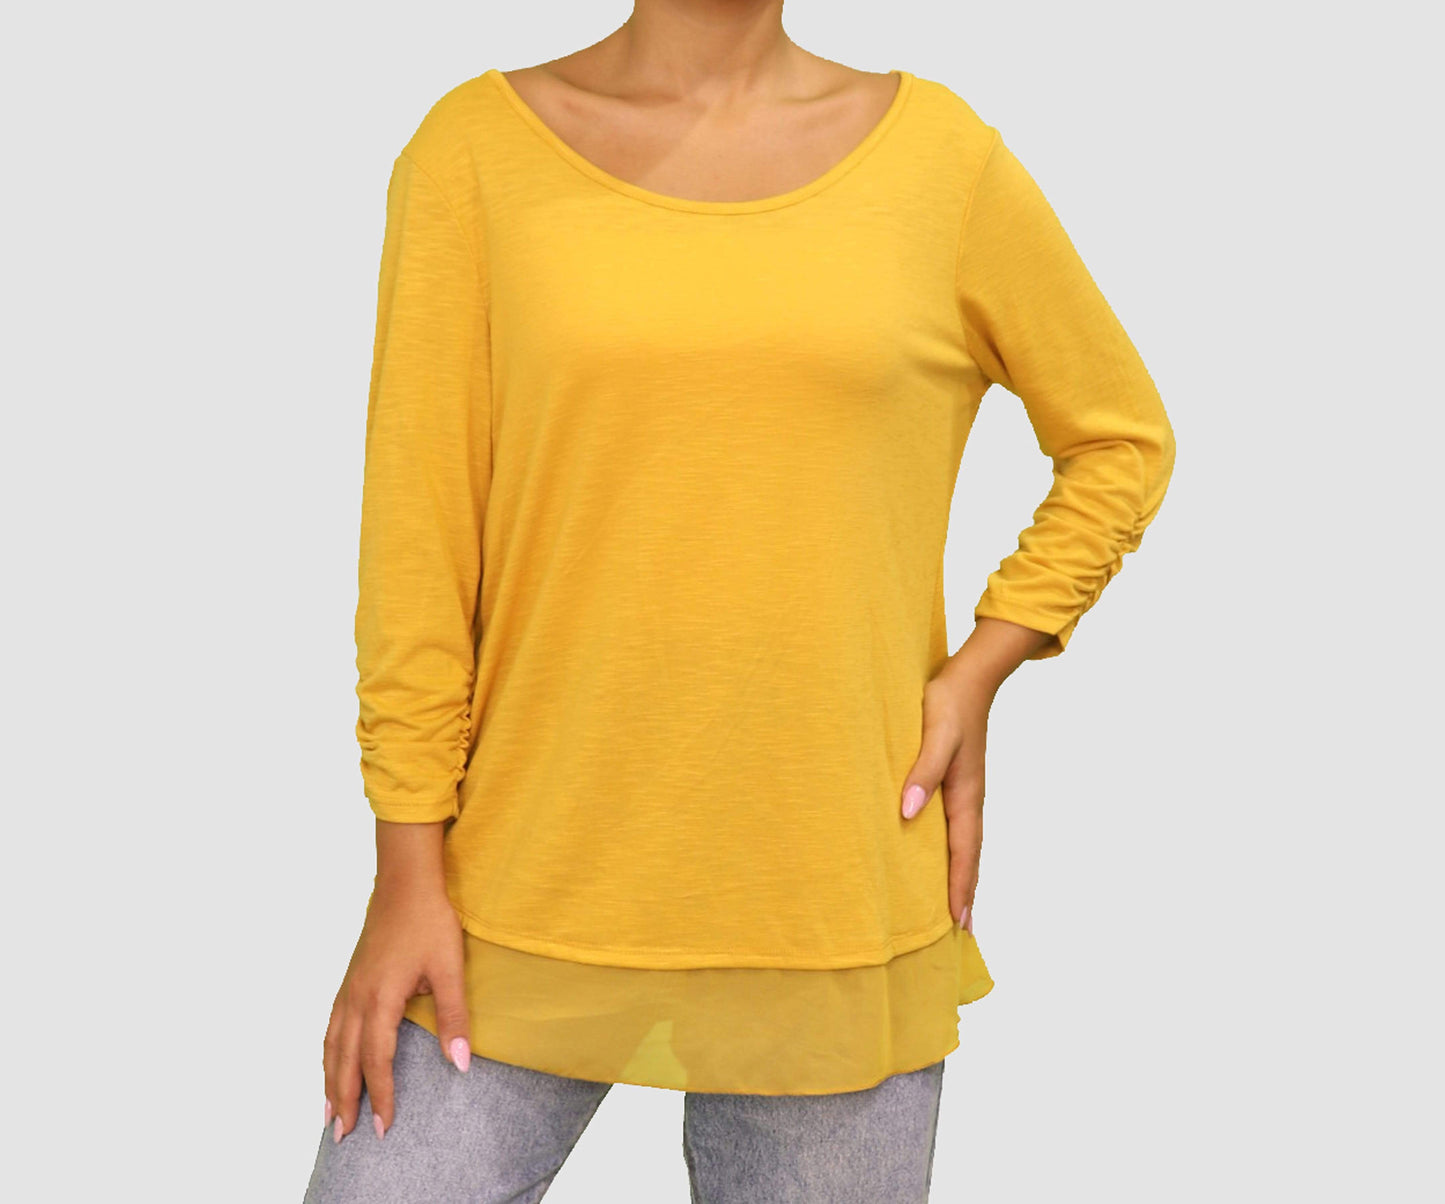 Style & Co Womens Tops S / Mustard Long Sleeve Top